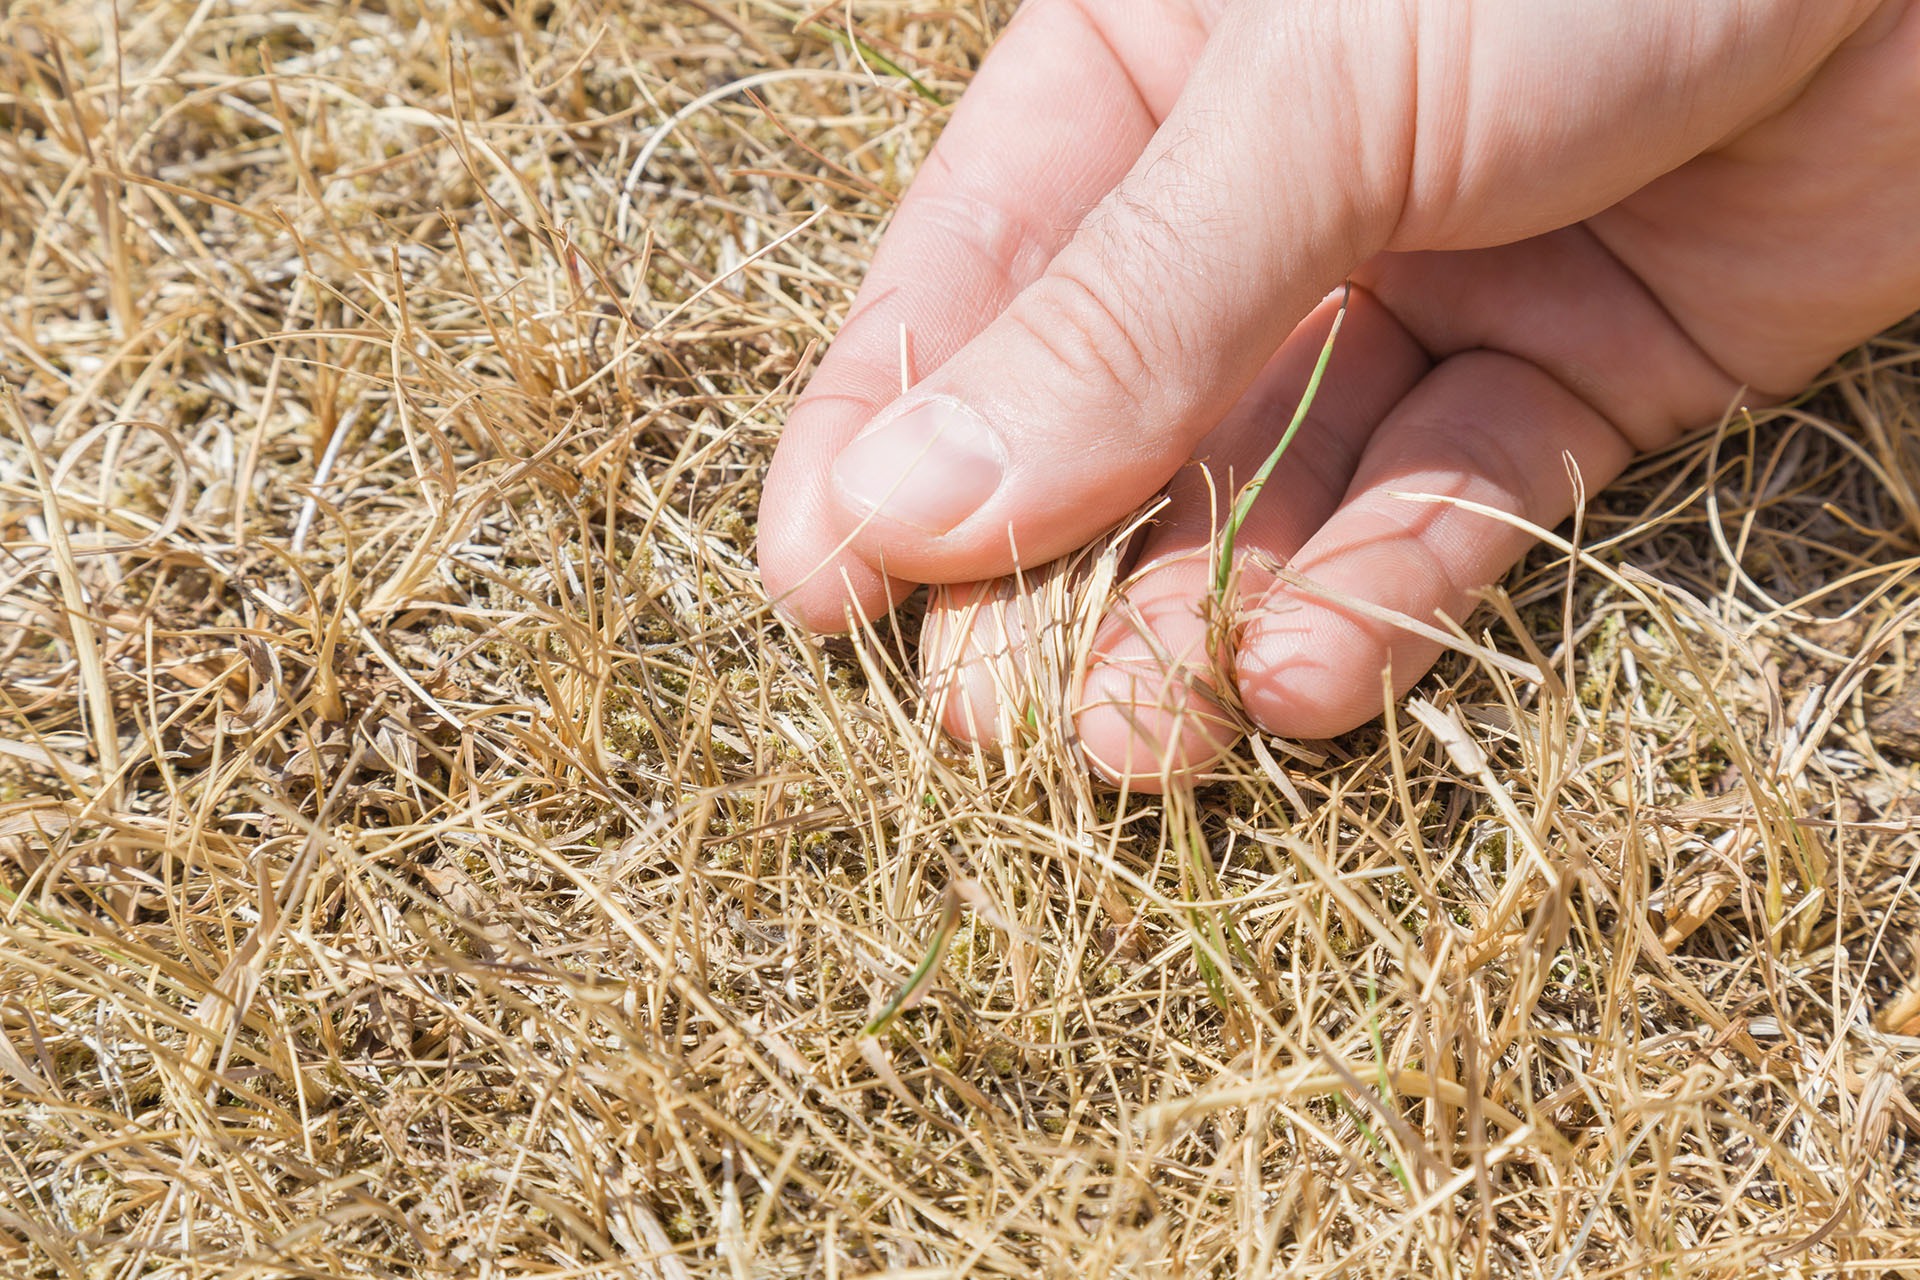 How to grow grass in hot dry weather – 5 steps to green grass even in heatwaves